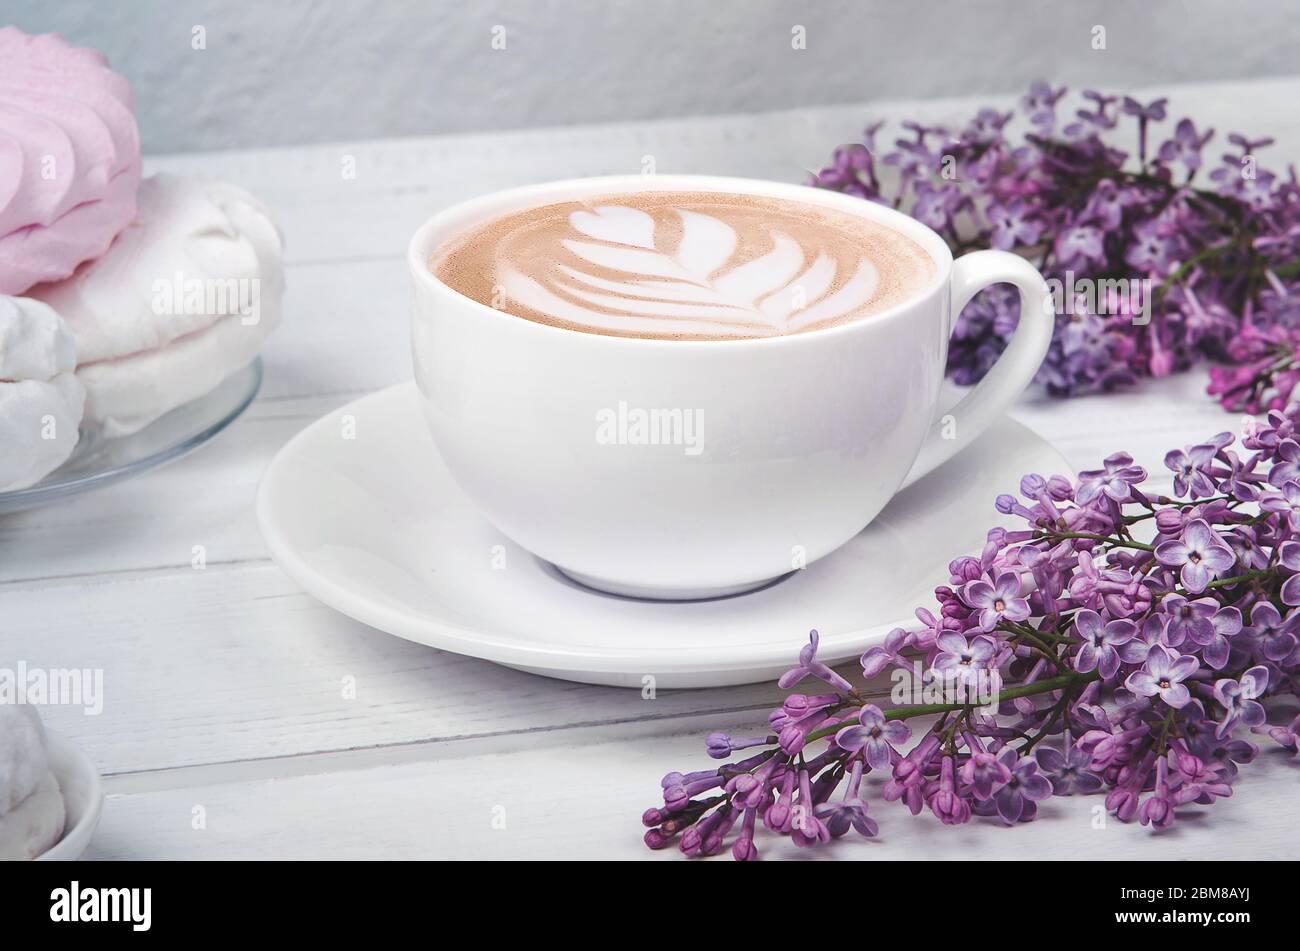 https://c8.alamy.com/comp/2BM8AYJ/lilac-coffee-cup-with-latte-art-and-white-and-pink-marshmallow-on-white-wooden-table-romantic-morning-flat-lay-2BM8AYJ.jpg